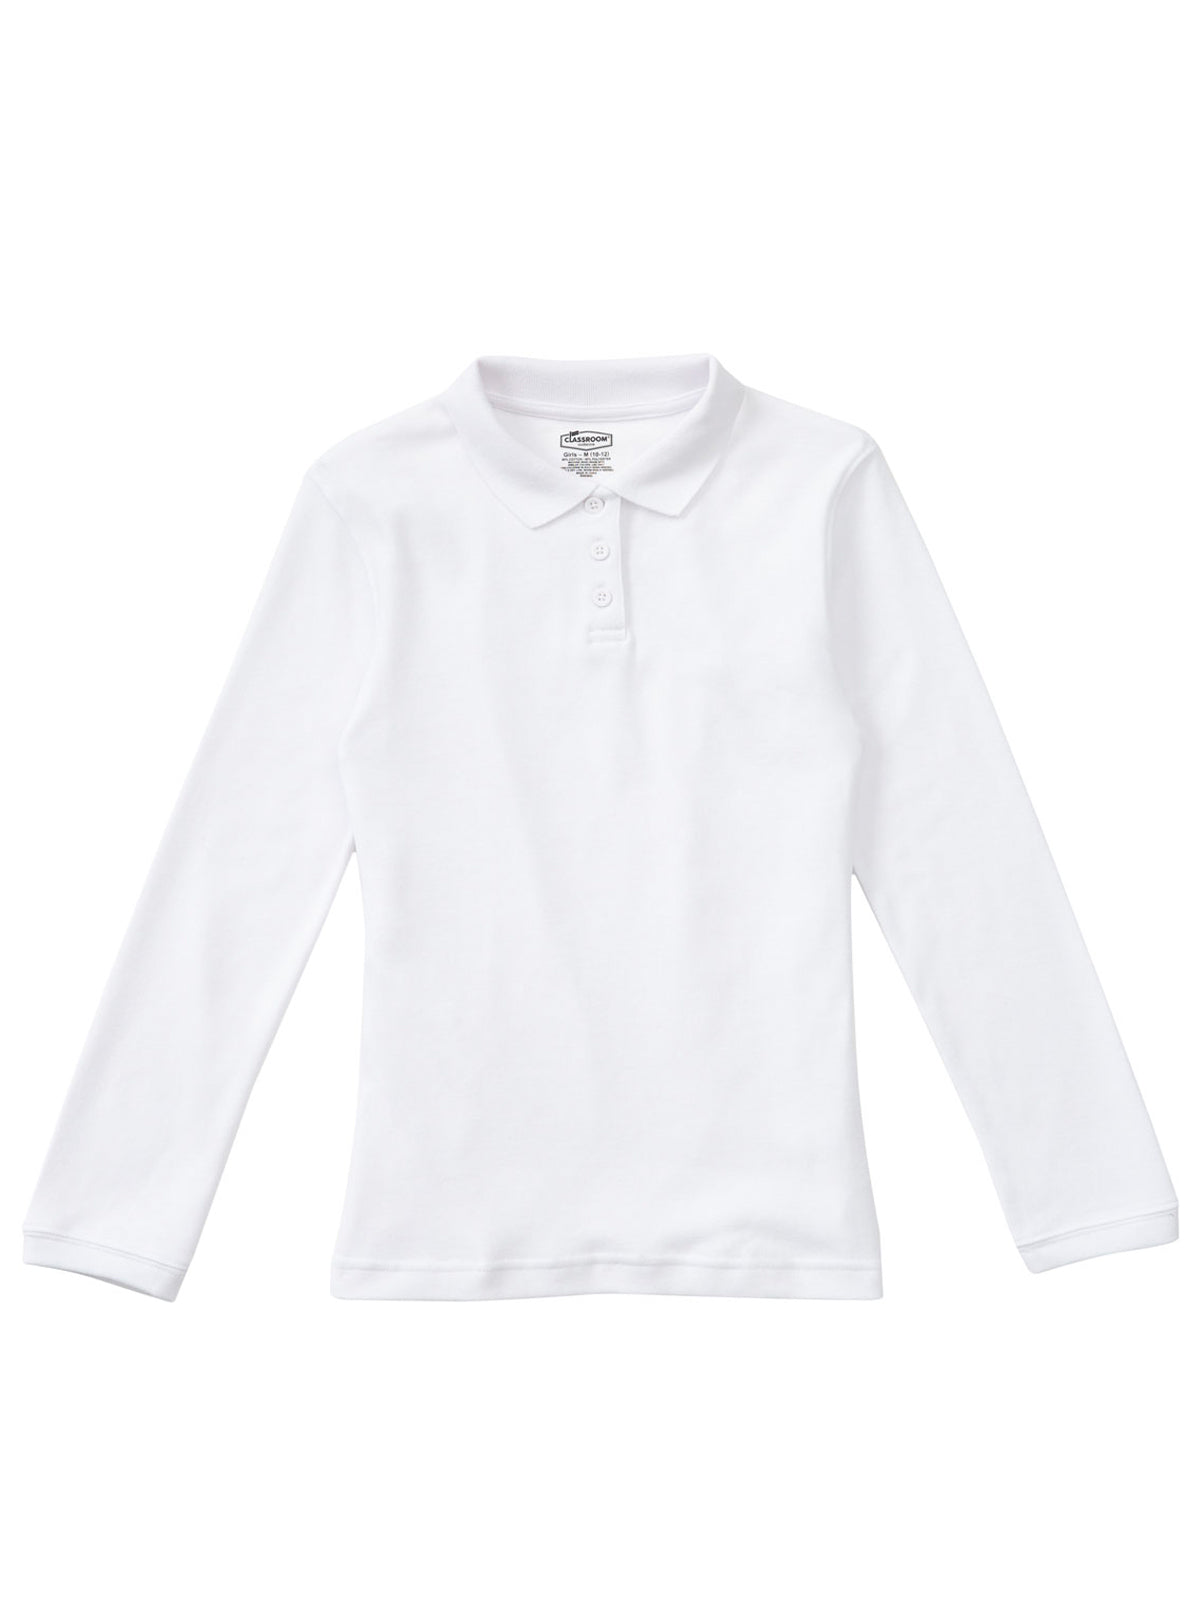 Girls' Long Sleeve Fitted Interlock Polo - CR854Y - White